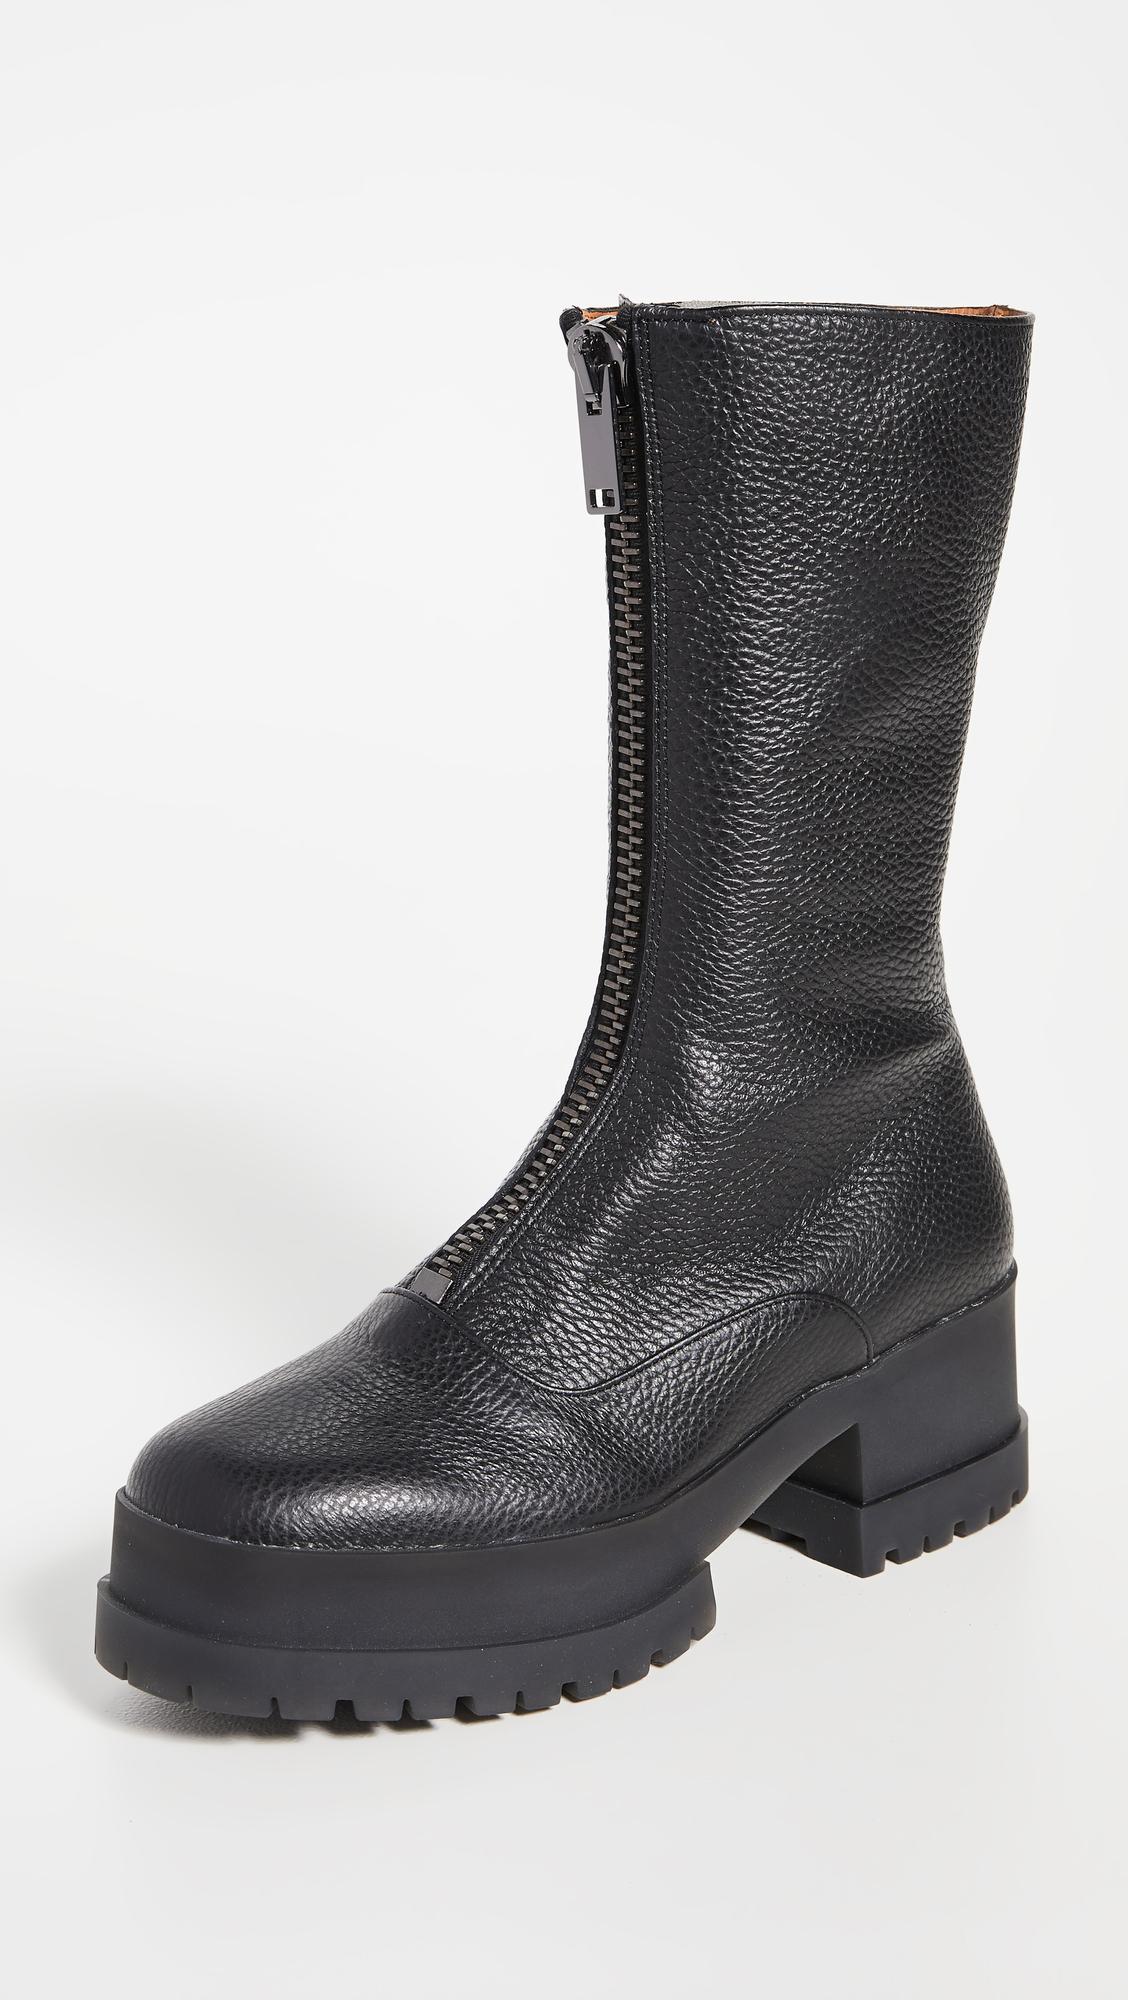 Robert Clergerie Wallace Boots in Black | Lyst